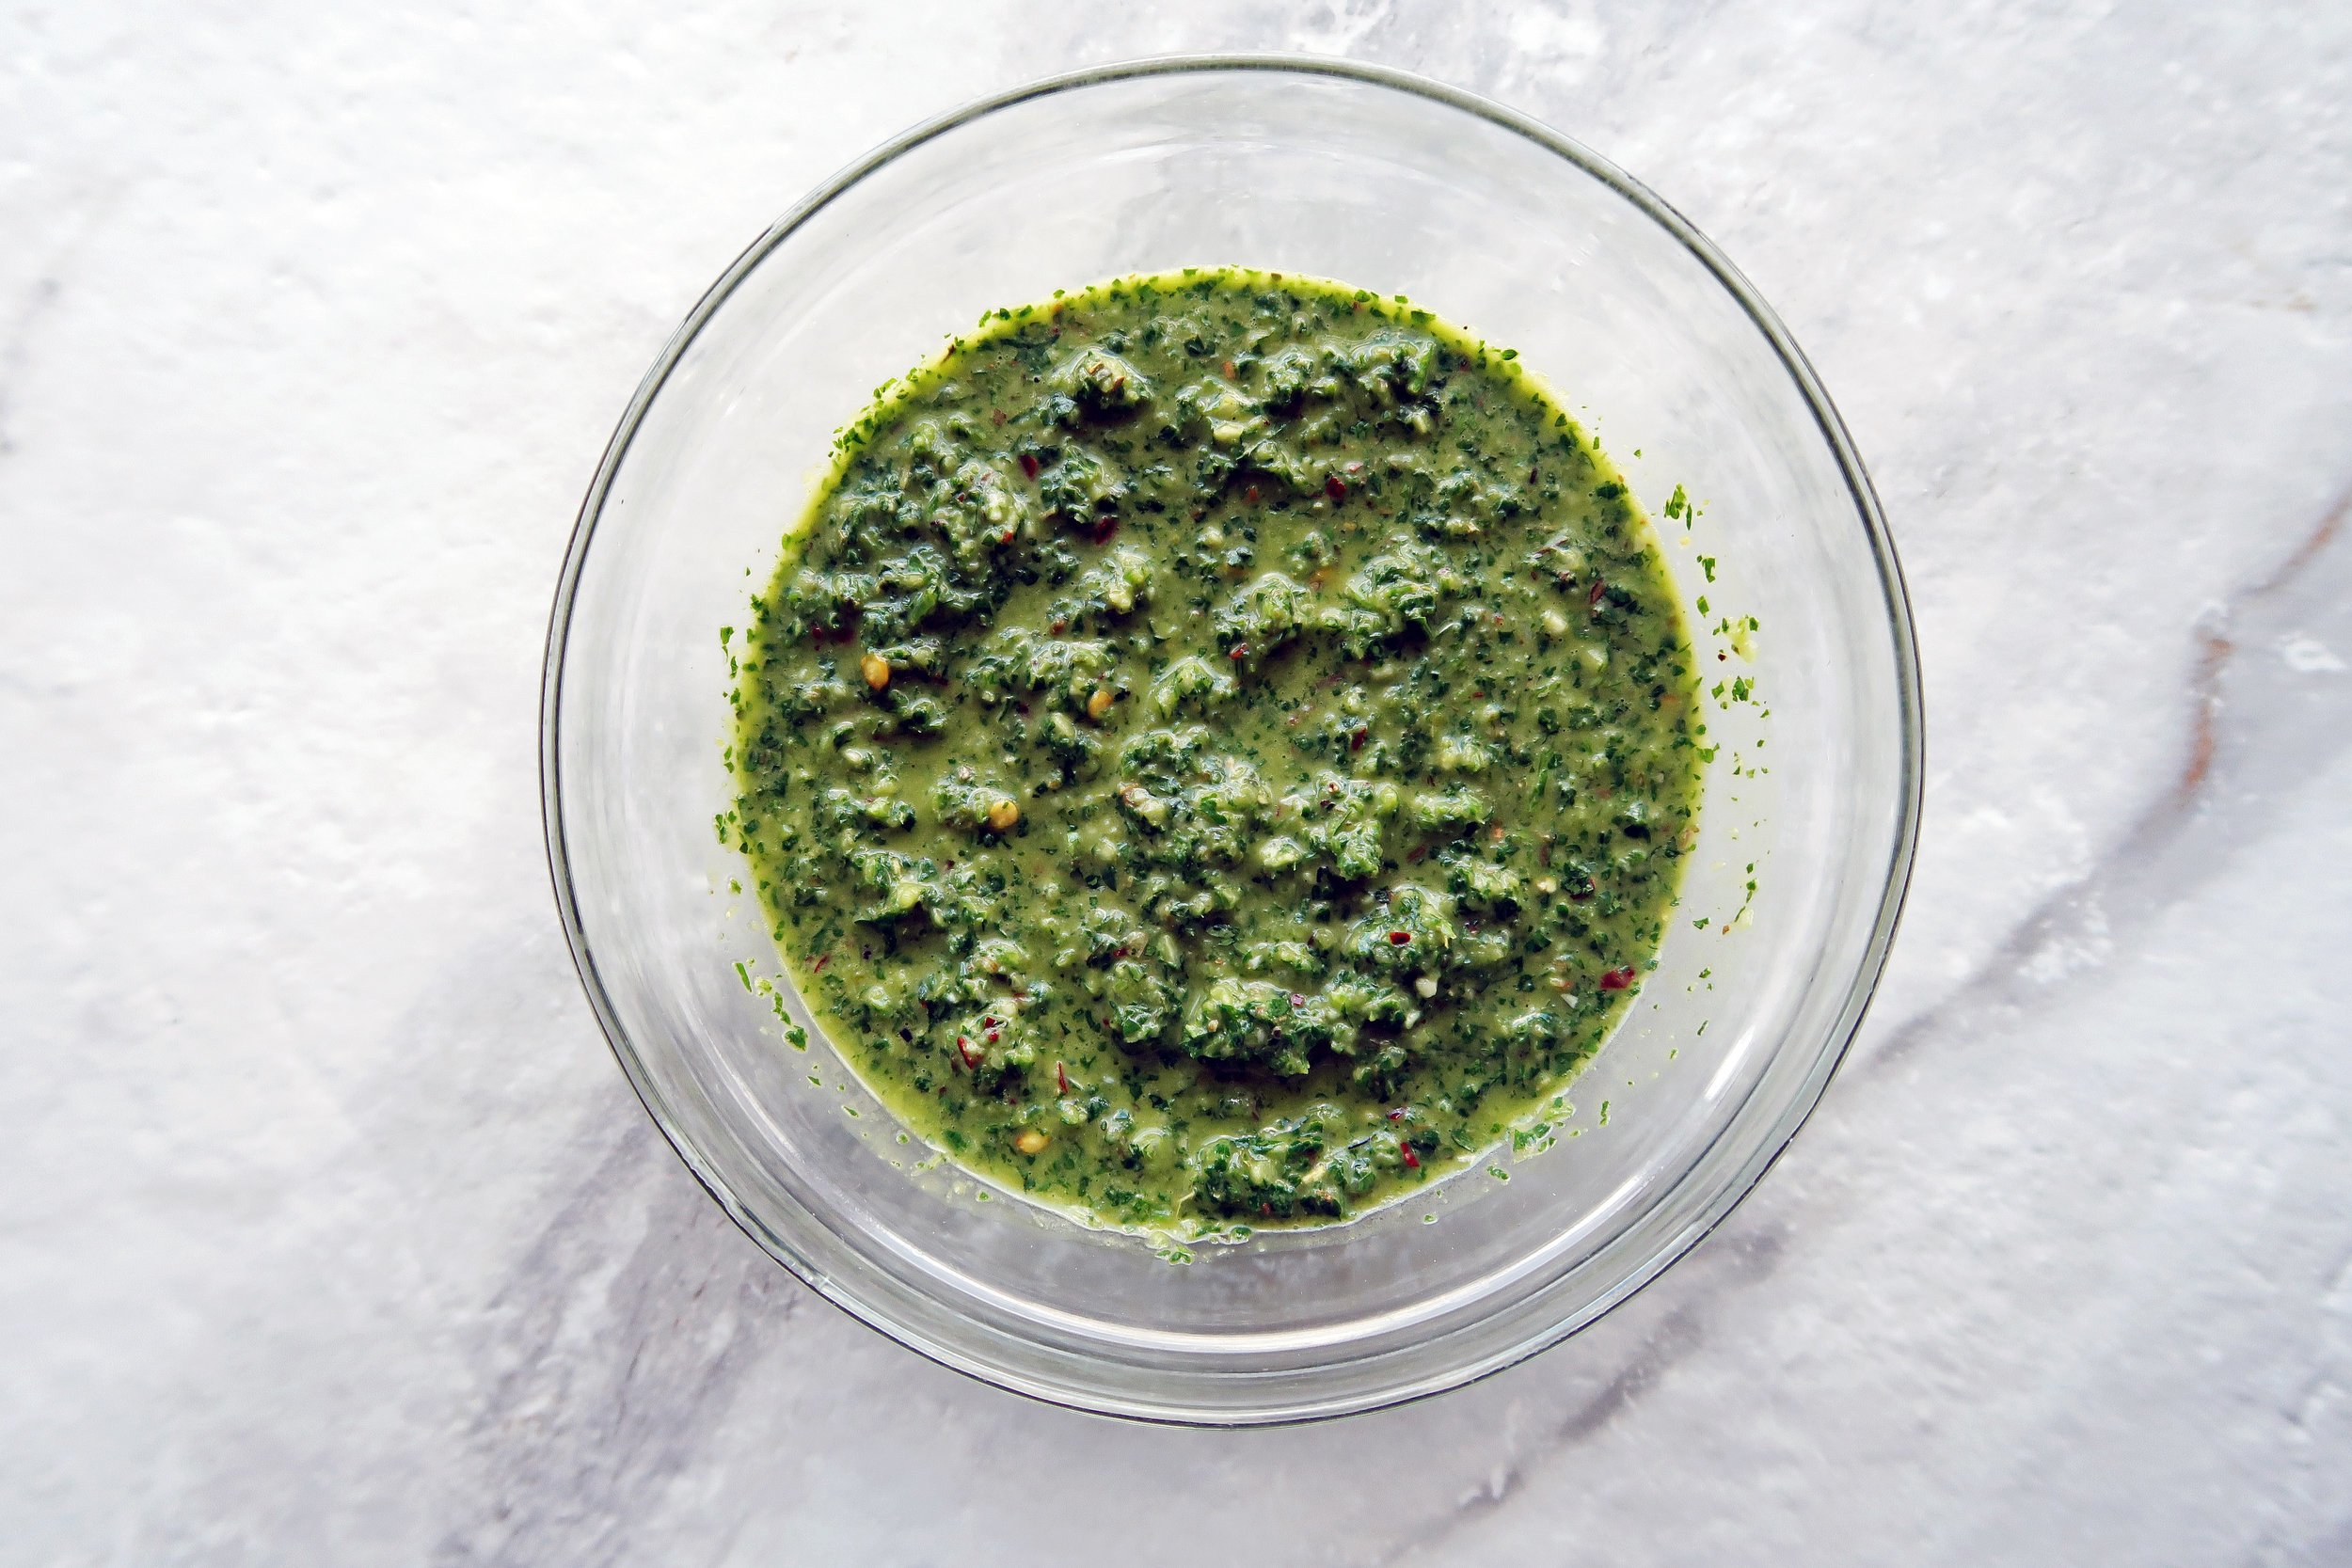 Freshly blended chimichurri sauce in a food processor.